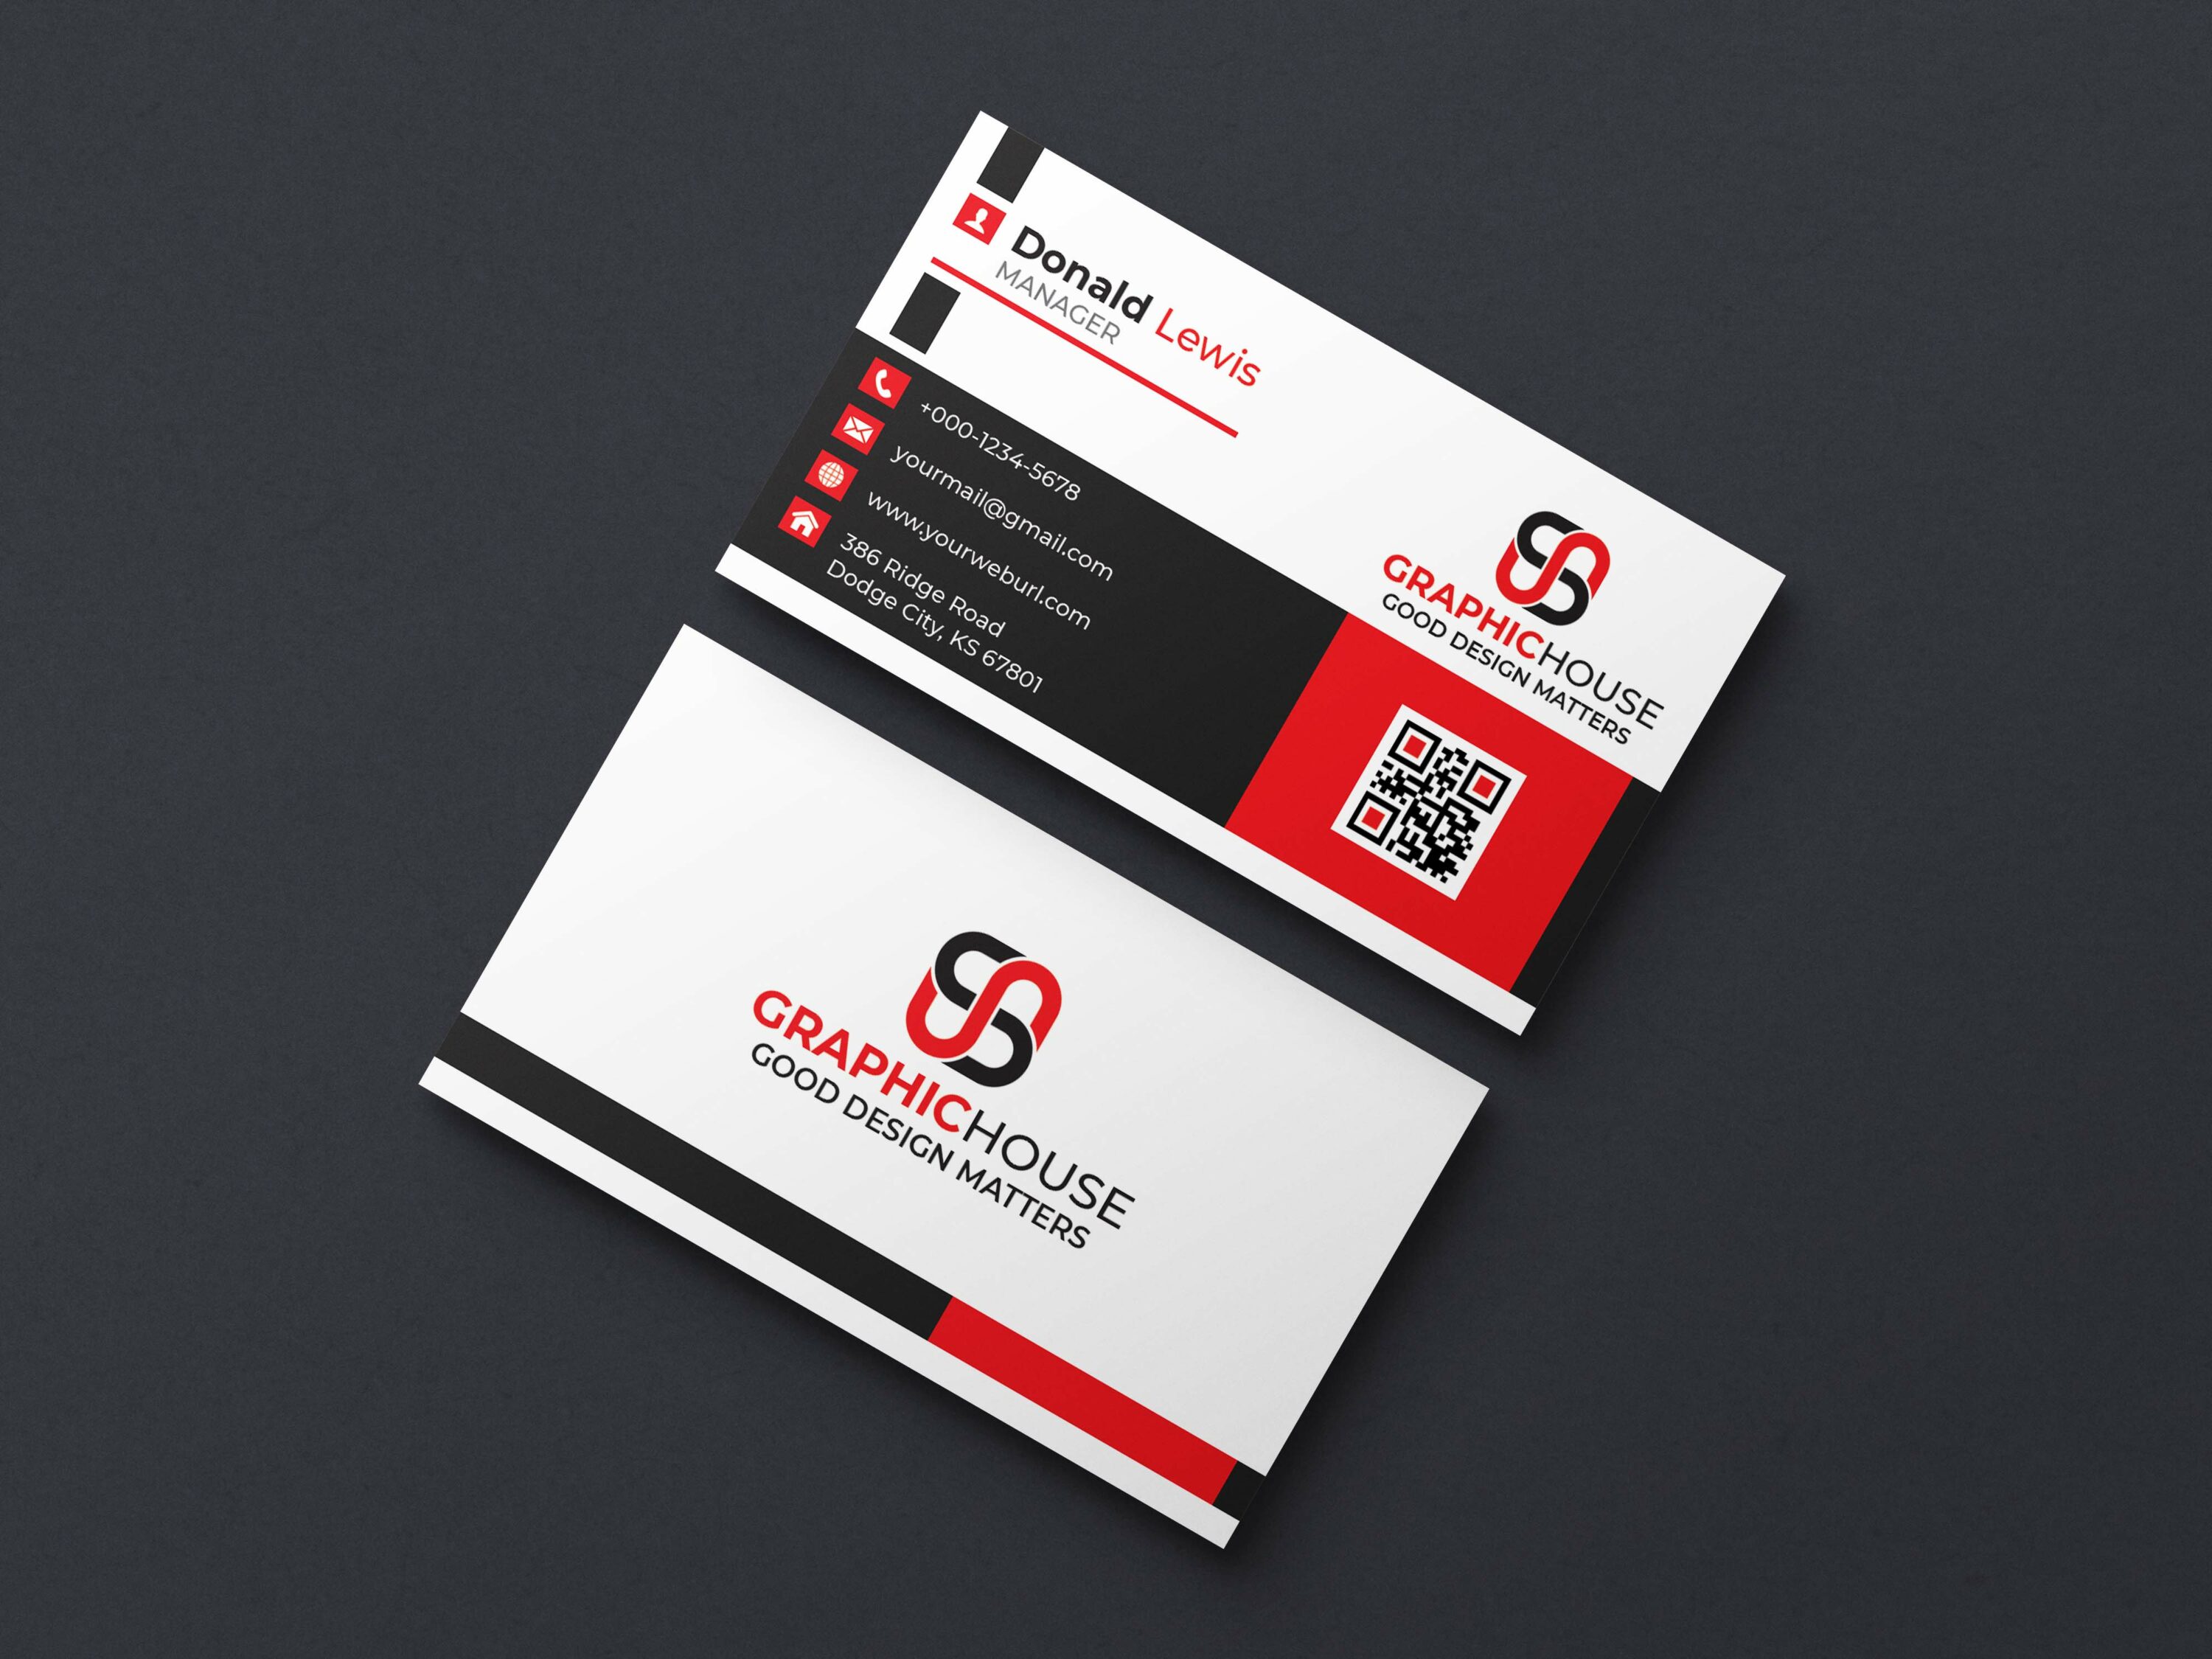 Stylish And Professional Business Card Template Front And Back Example.